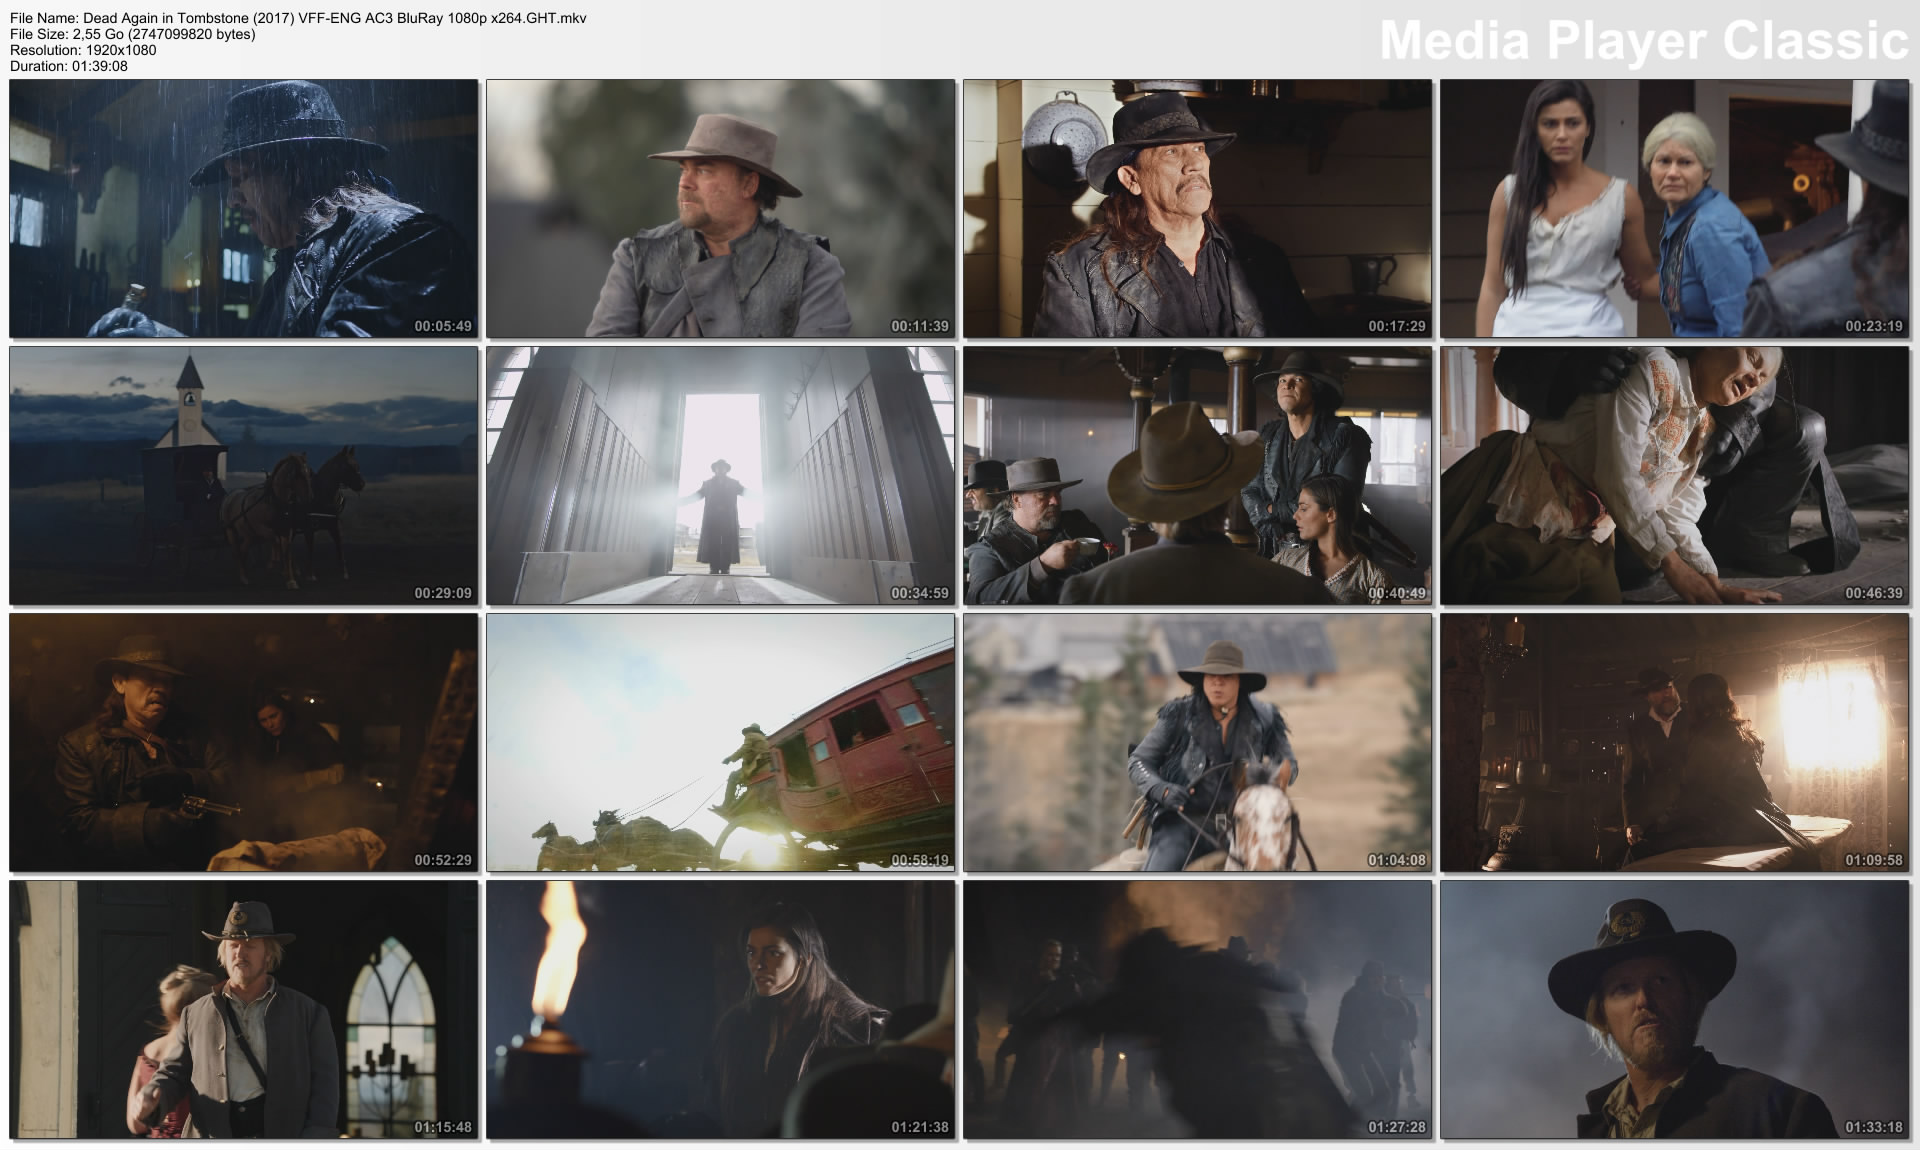 Dead Again in Tombstone (2017) VFF-ENG AC3 BluRay 1080p x264.GHT